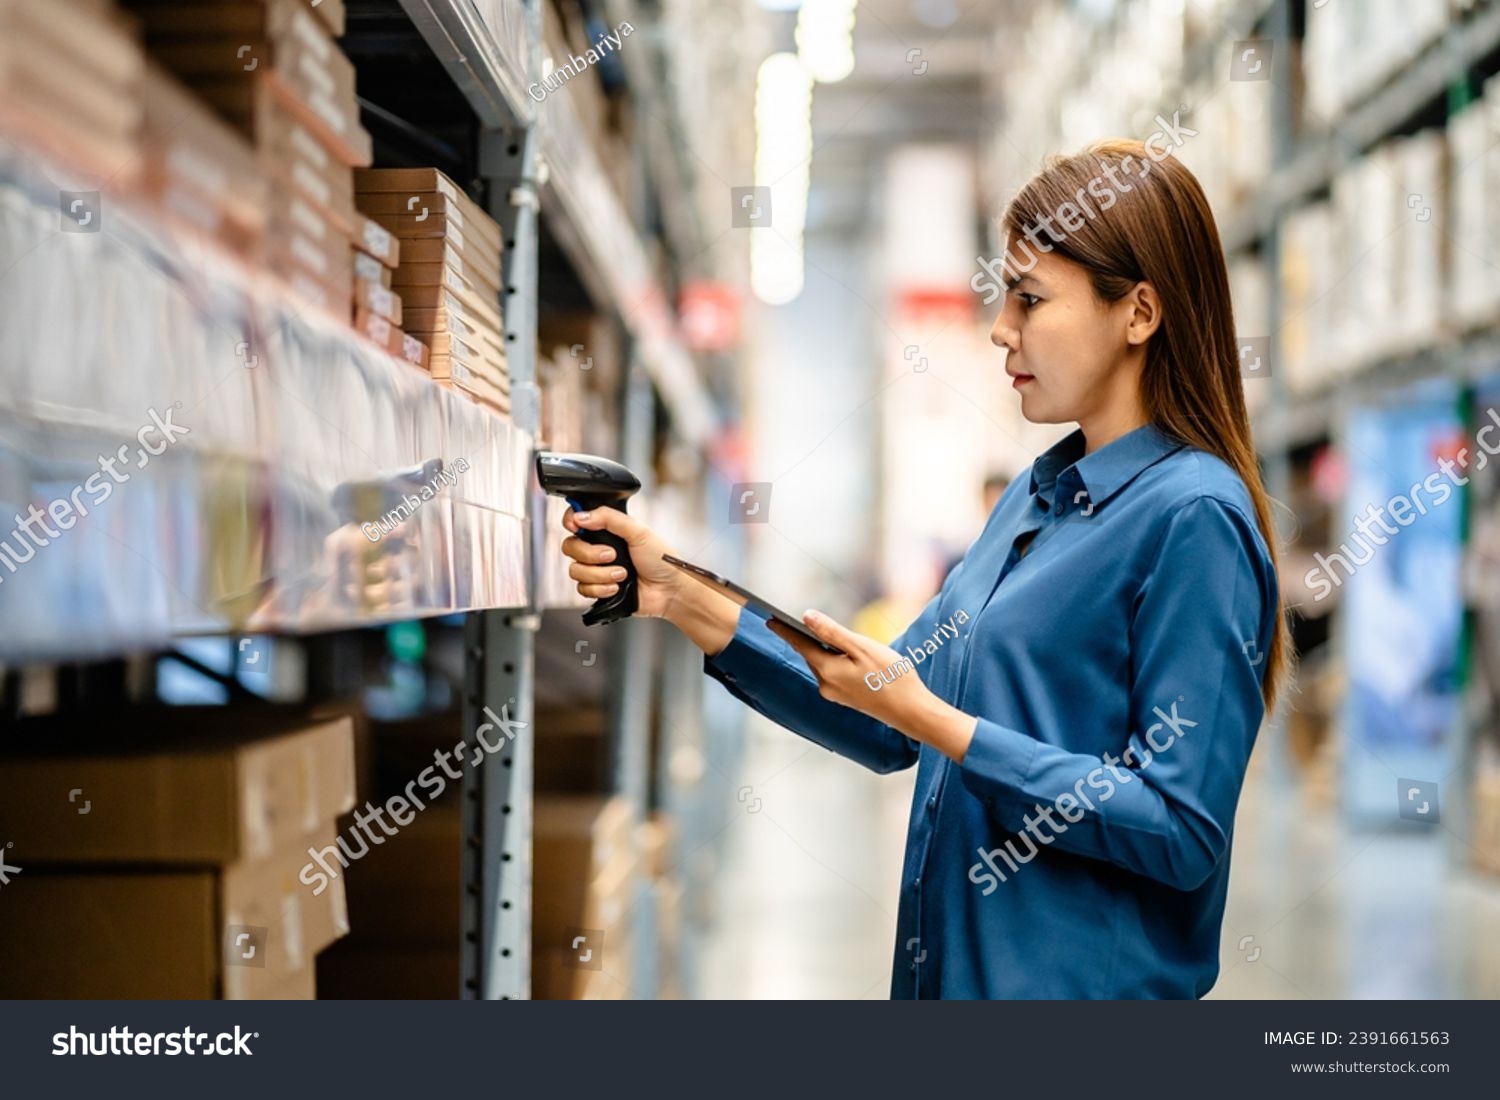 Women worker use scanner to check and scan barcodes of stock inventory on shelves to keep storage in a system, Smart warehouse management system, Supply chain and logistic network technology concept. #2391661563